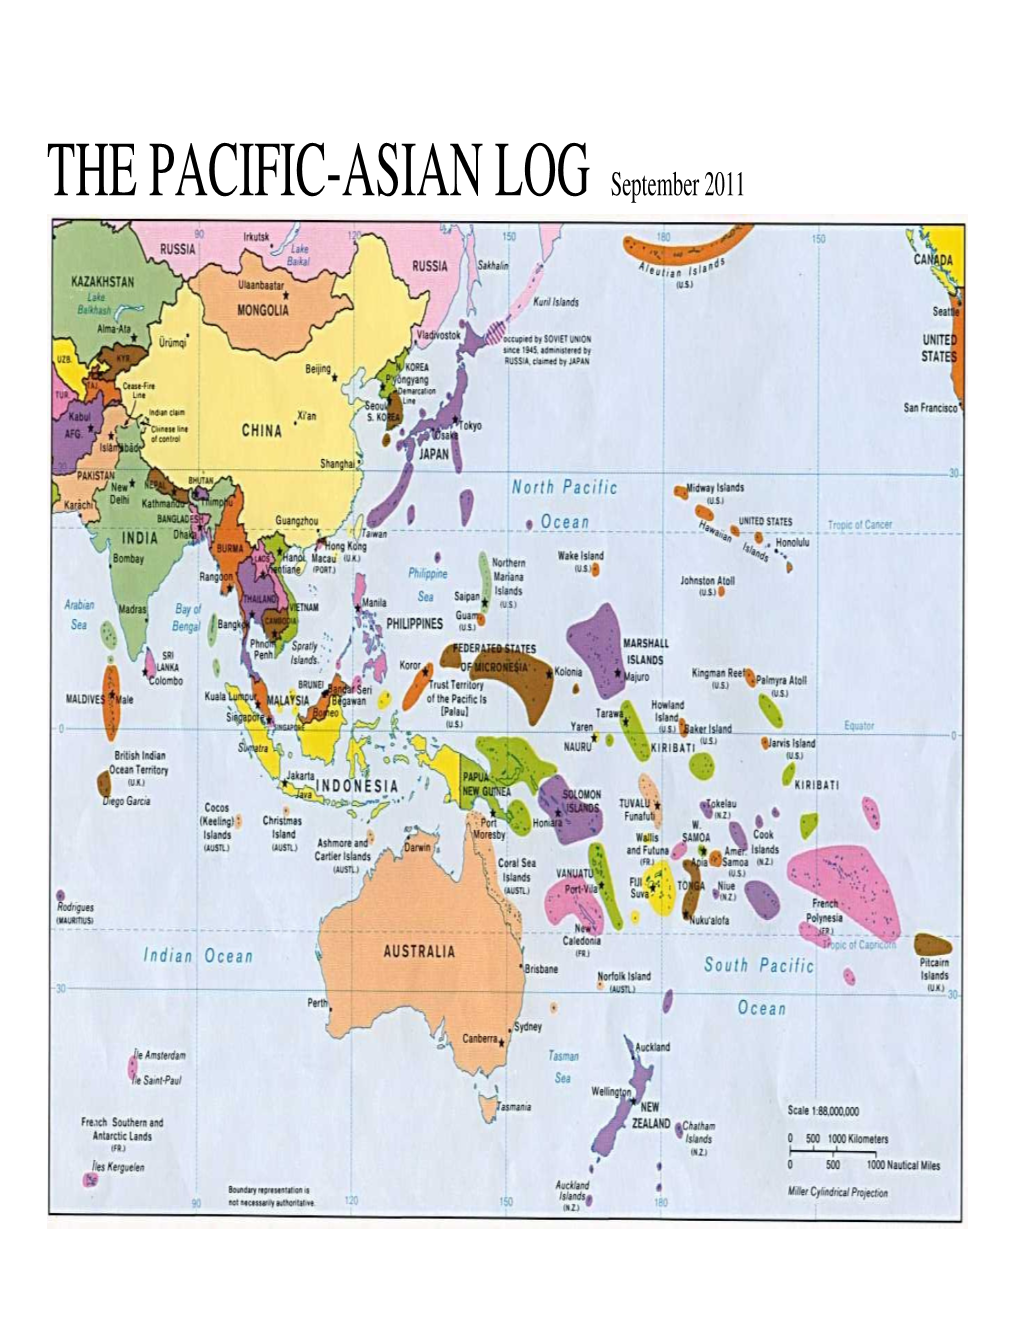 THE PACIFIC-ASIAN LOG September 2011